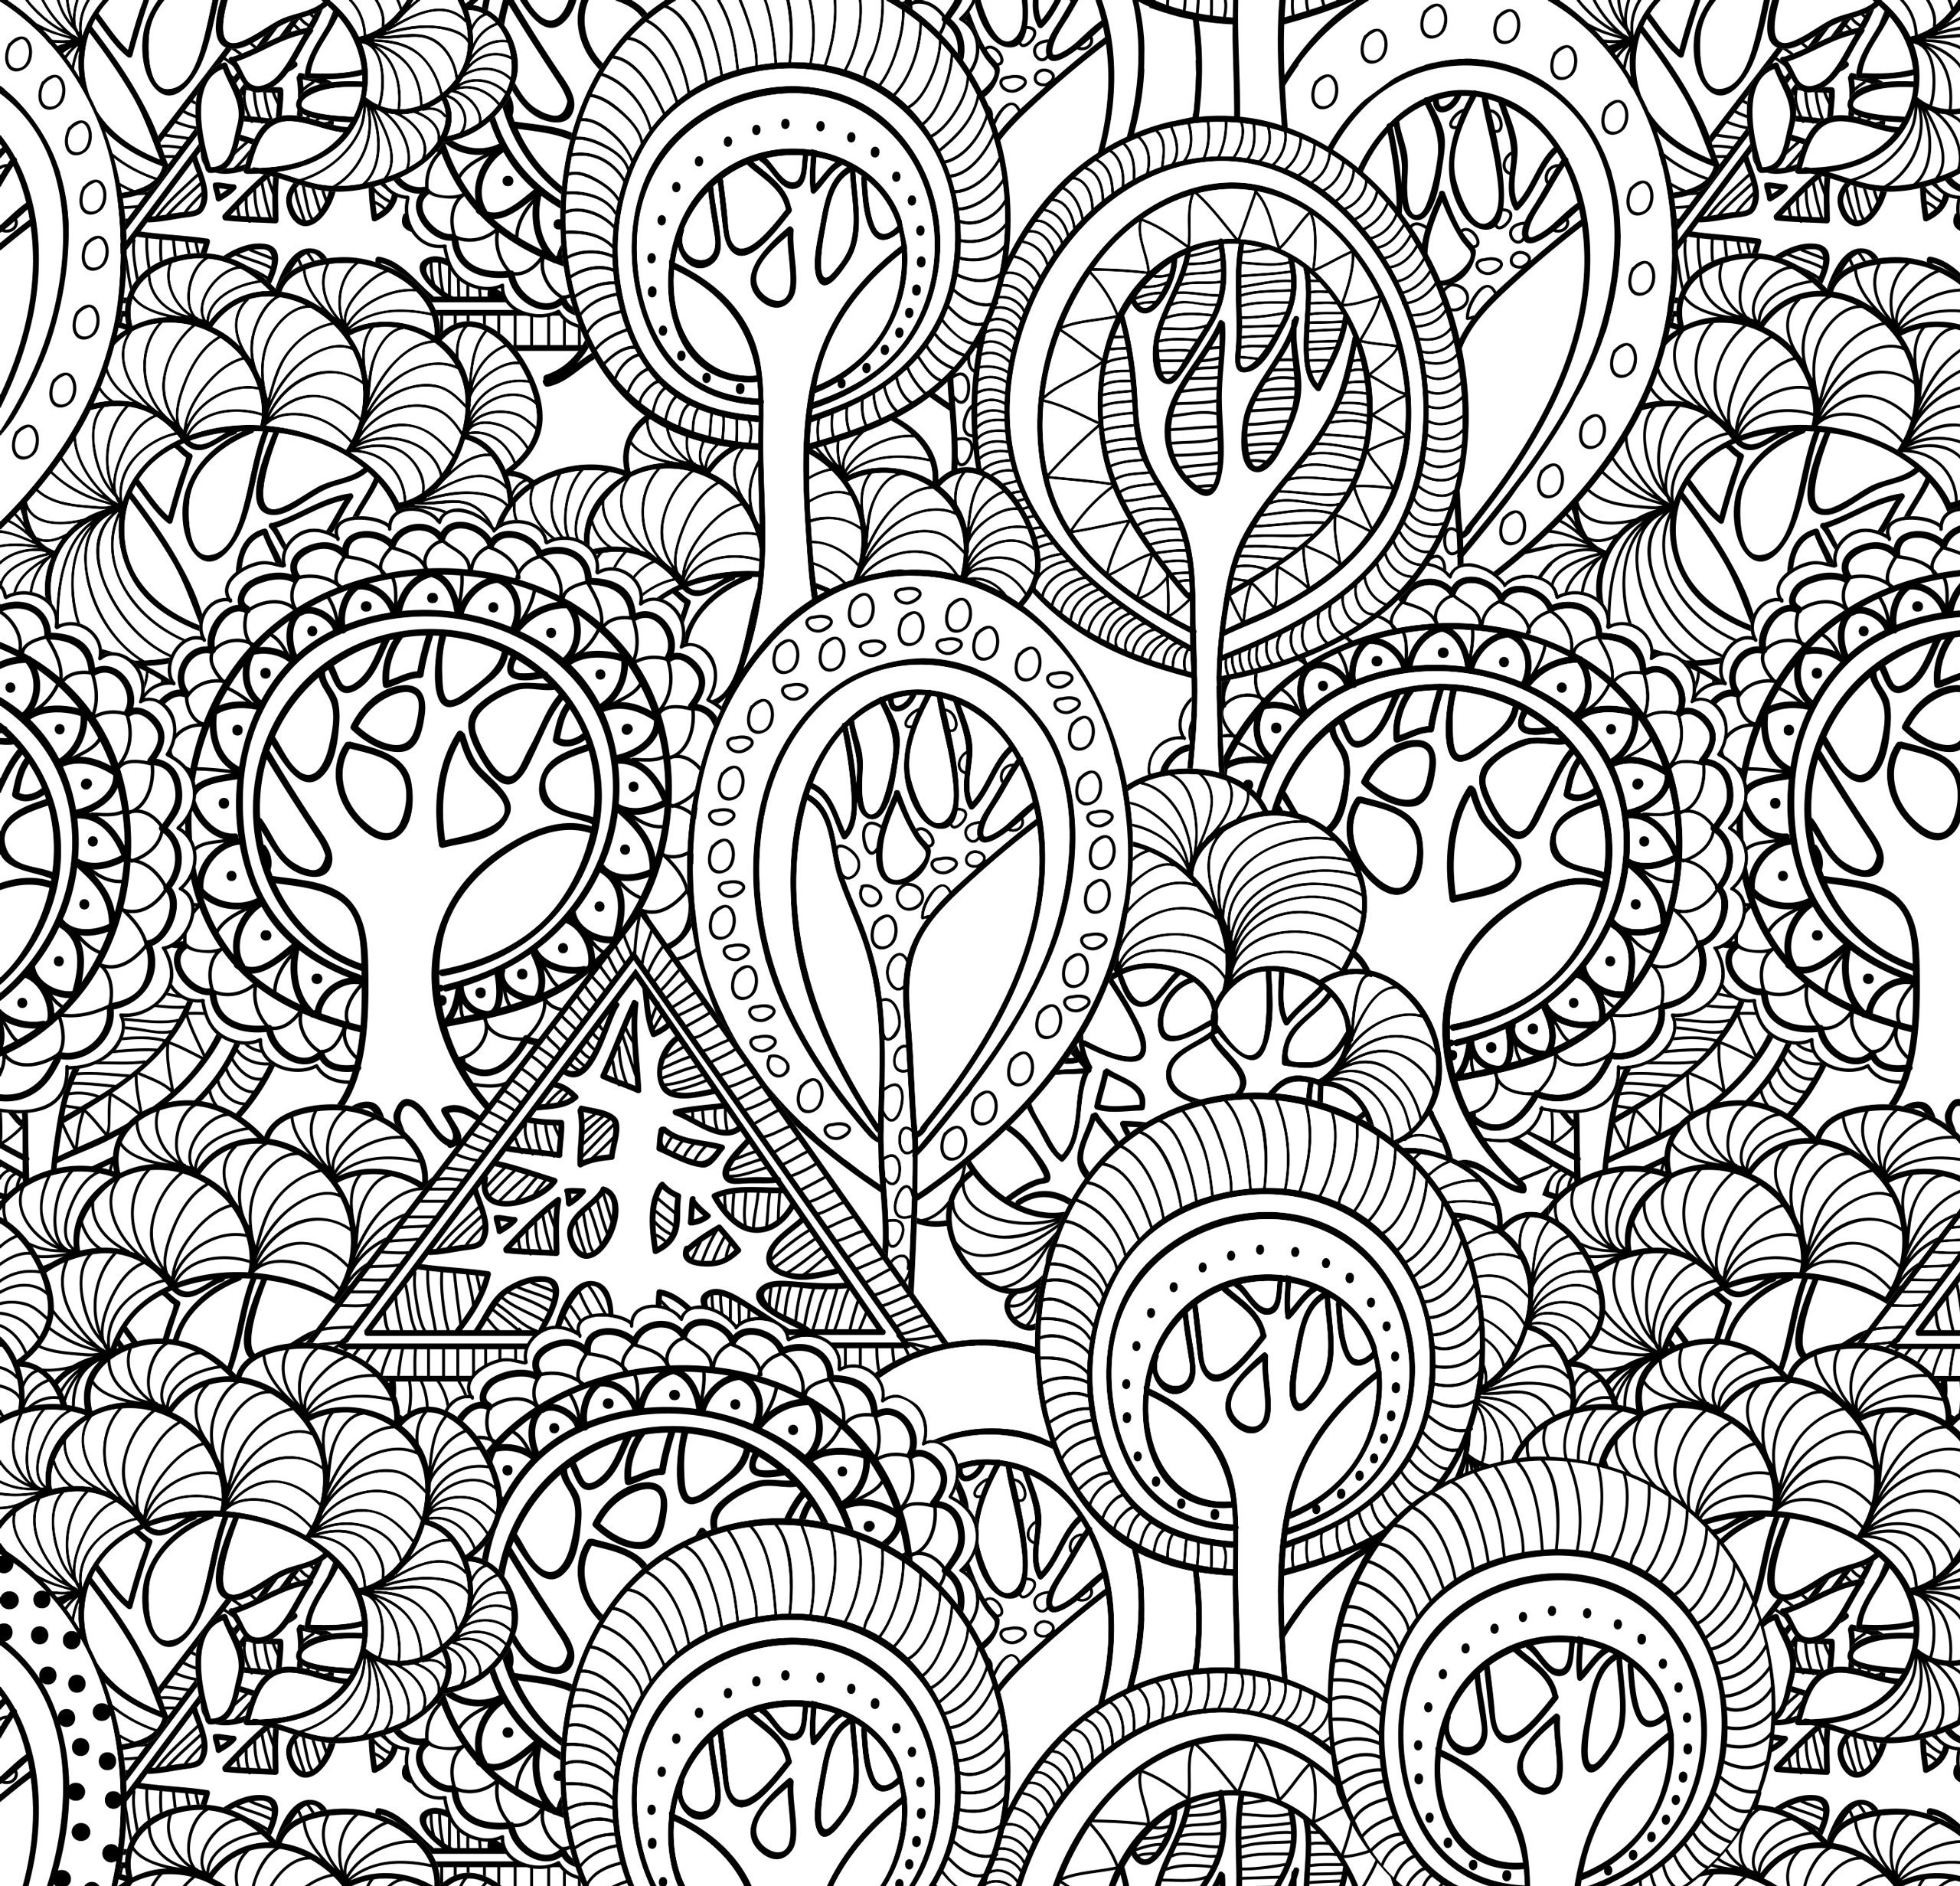 St Augustine Coloring Page 20 Awesome Pirate Ship Coloring Page Msainfo